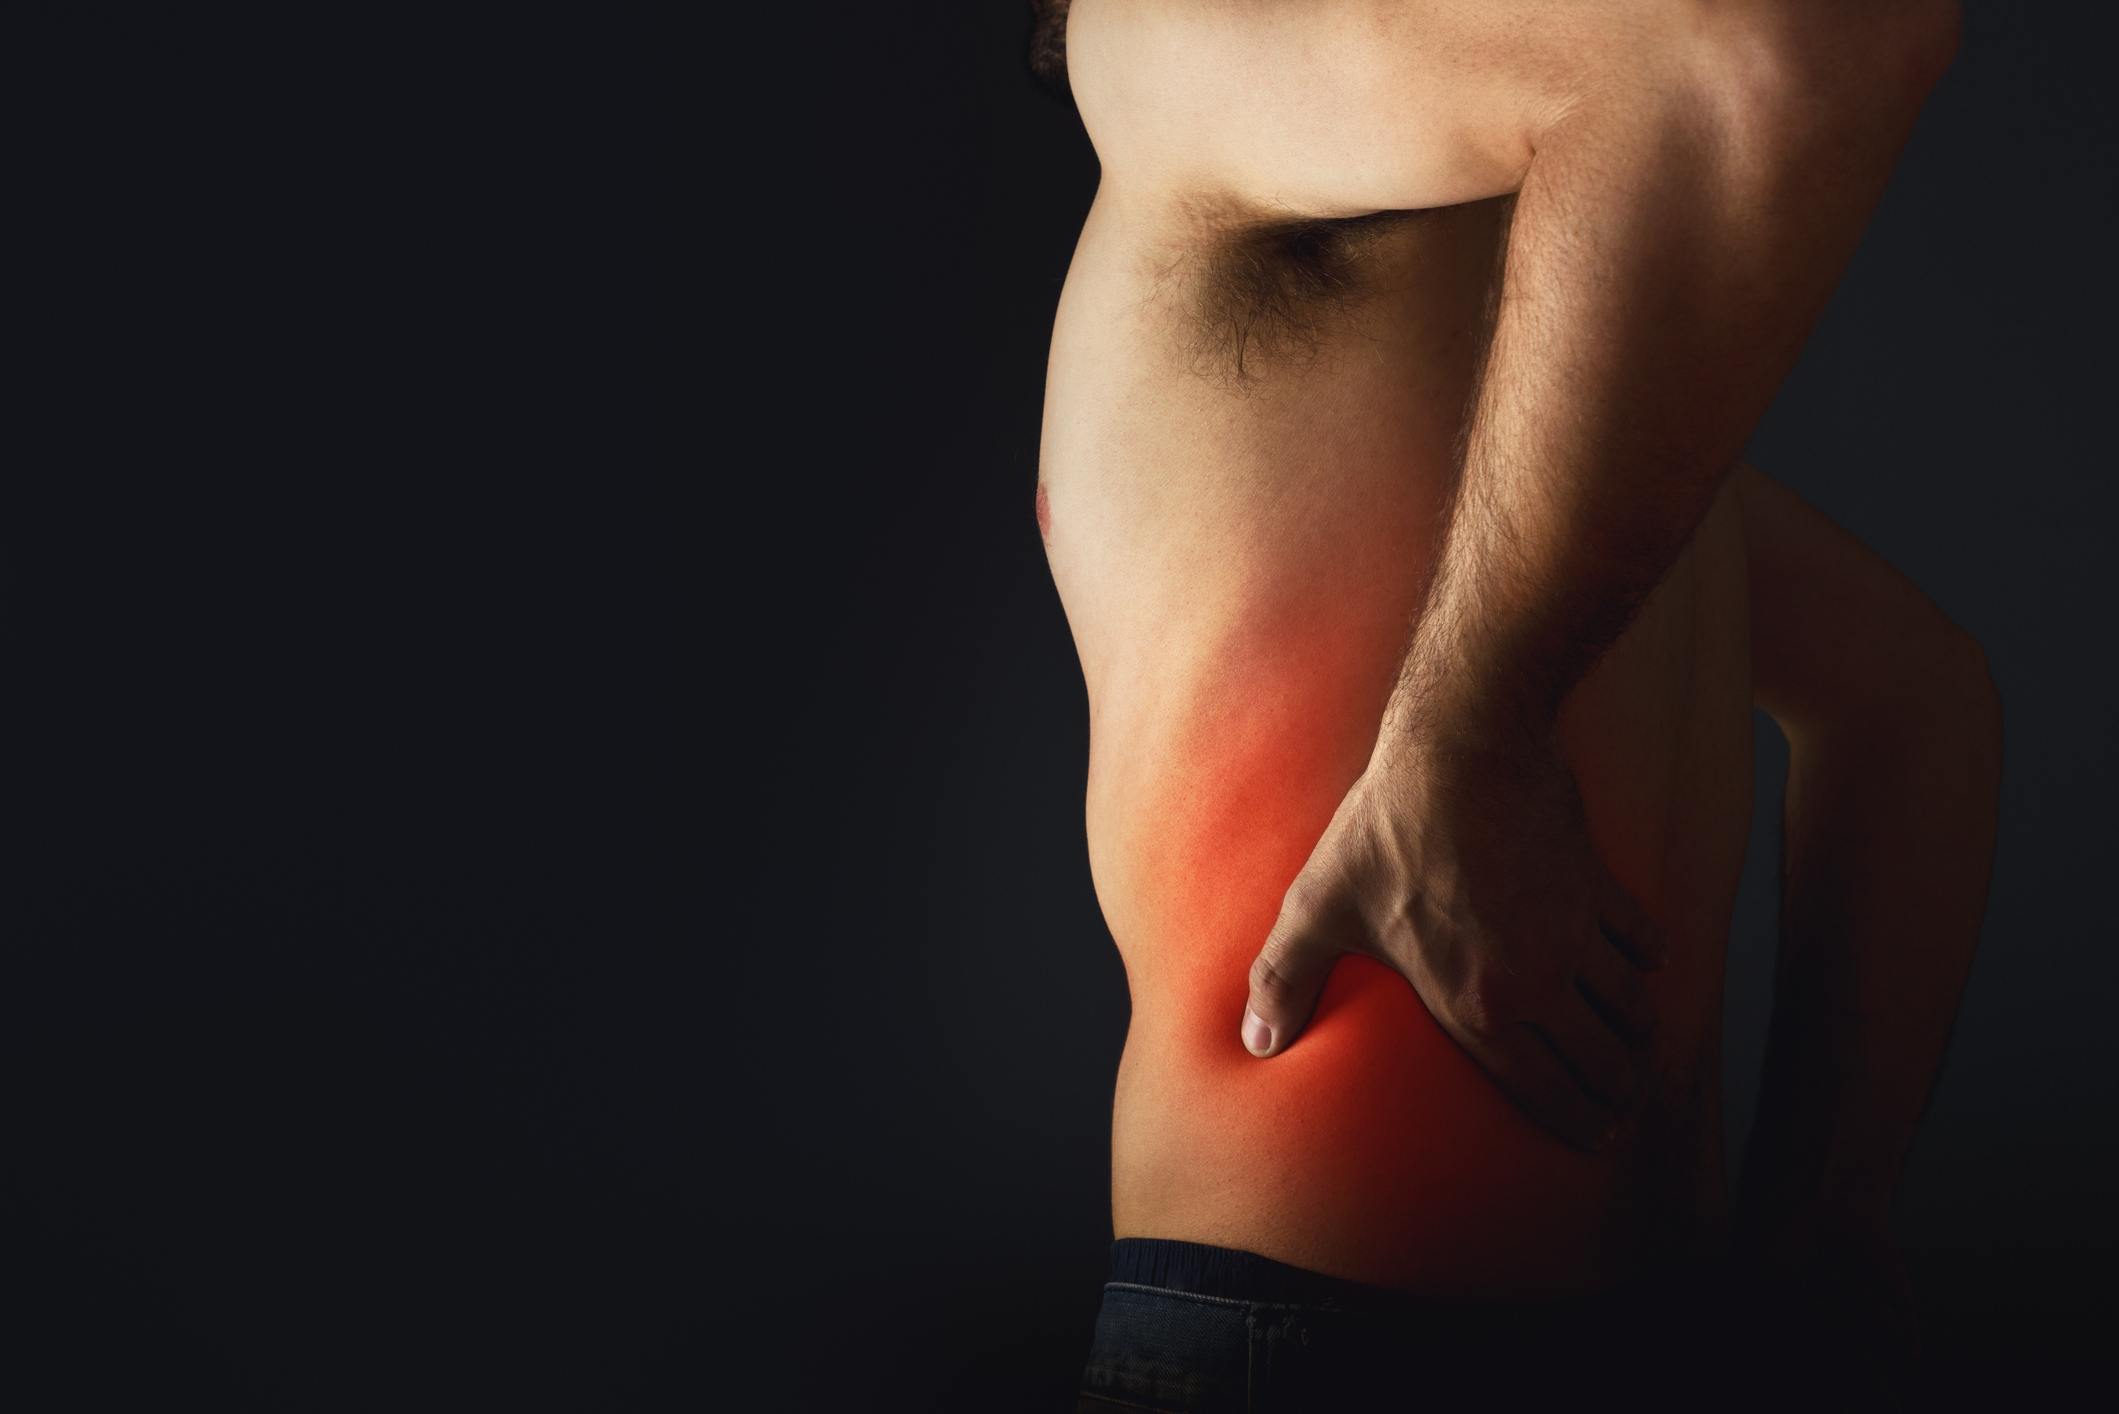 What Can Make Sciatica Worse? - Pain Management & Injury Relief